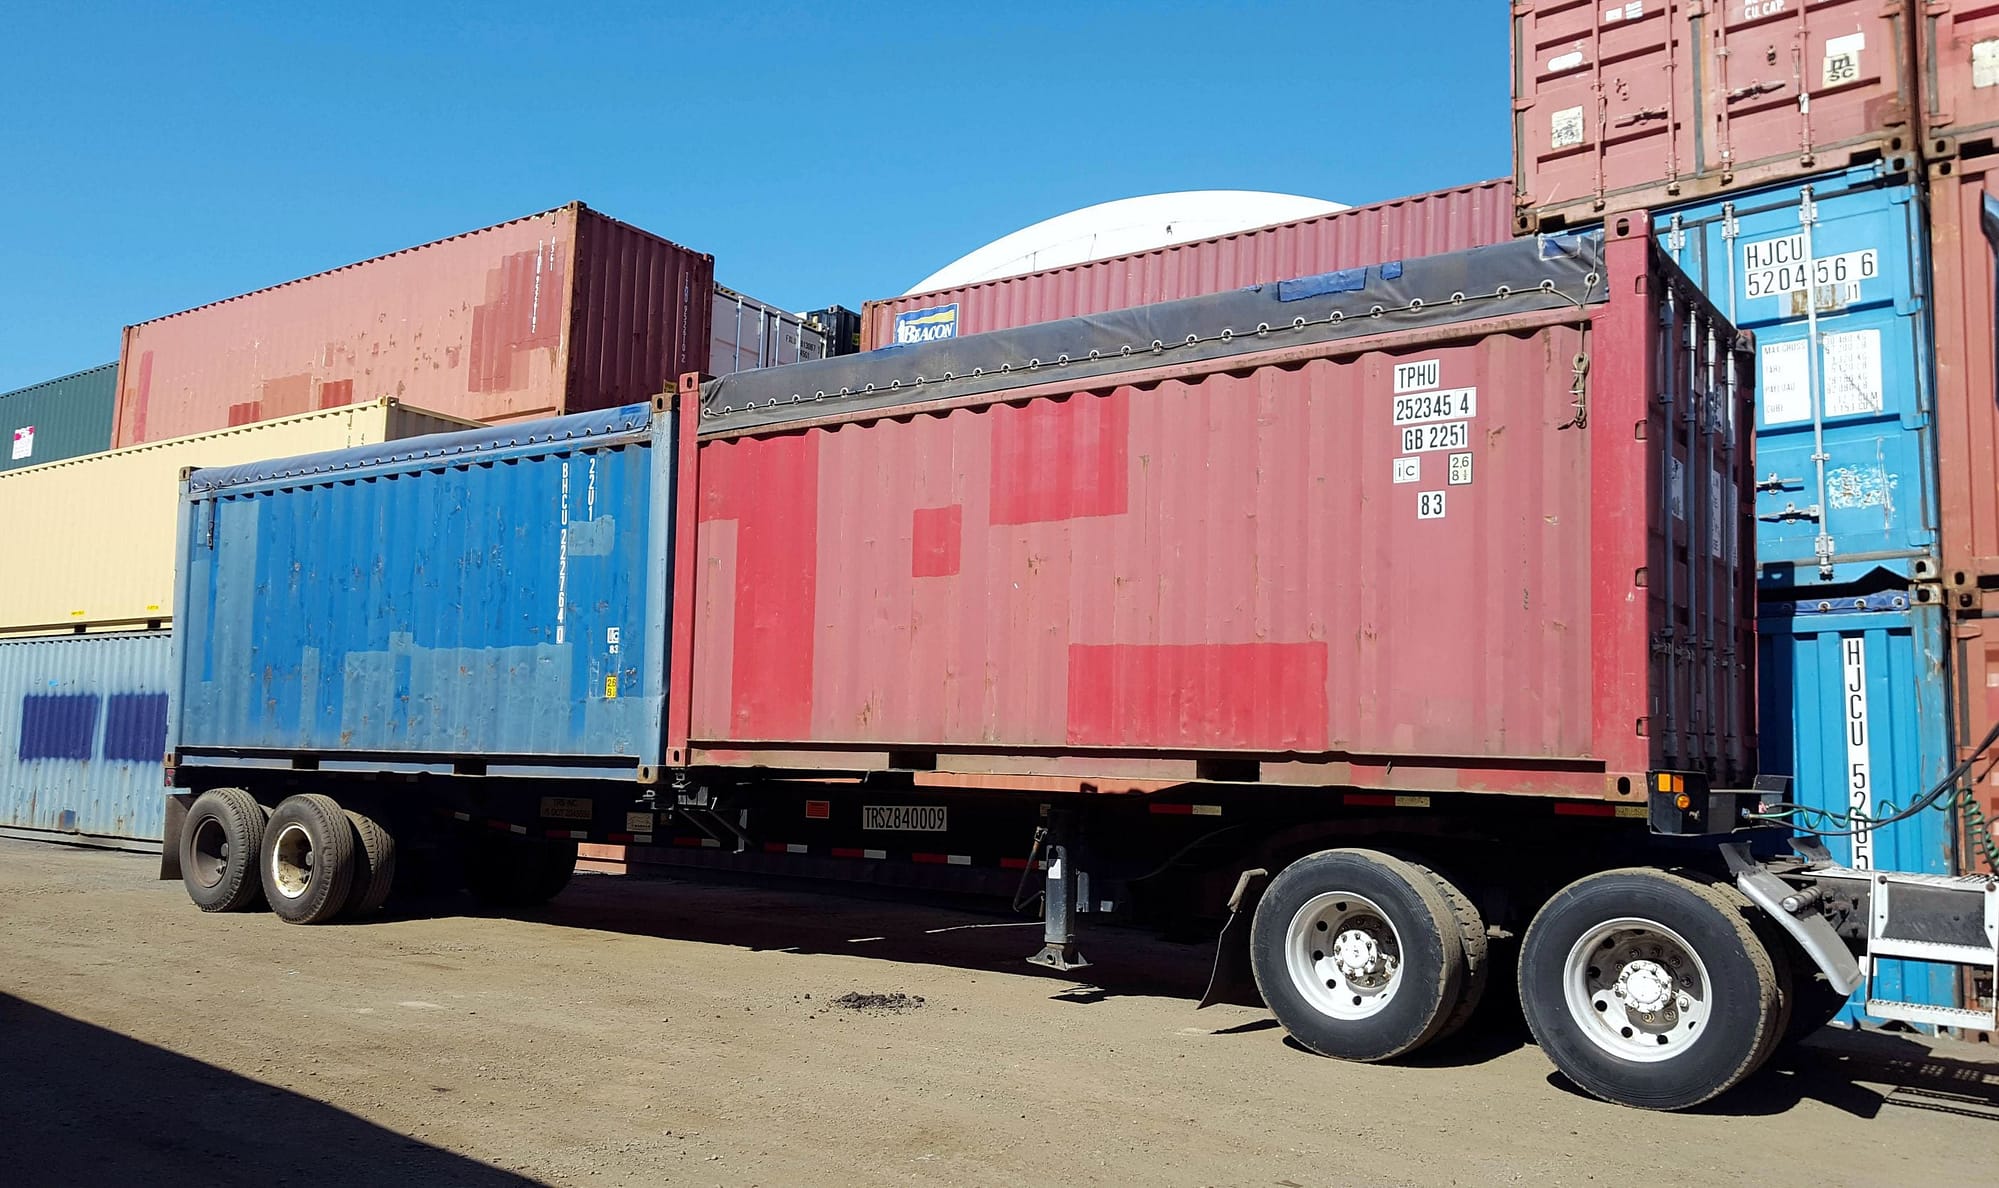 TRS sells opentop shipping containers for domestic use or export